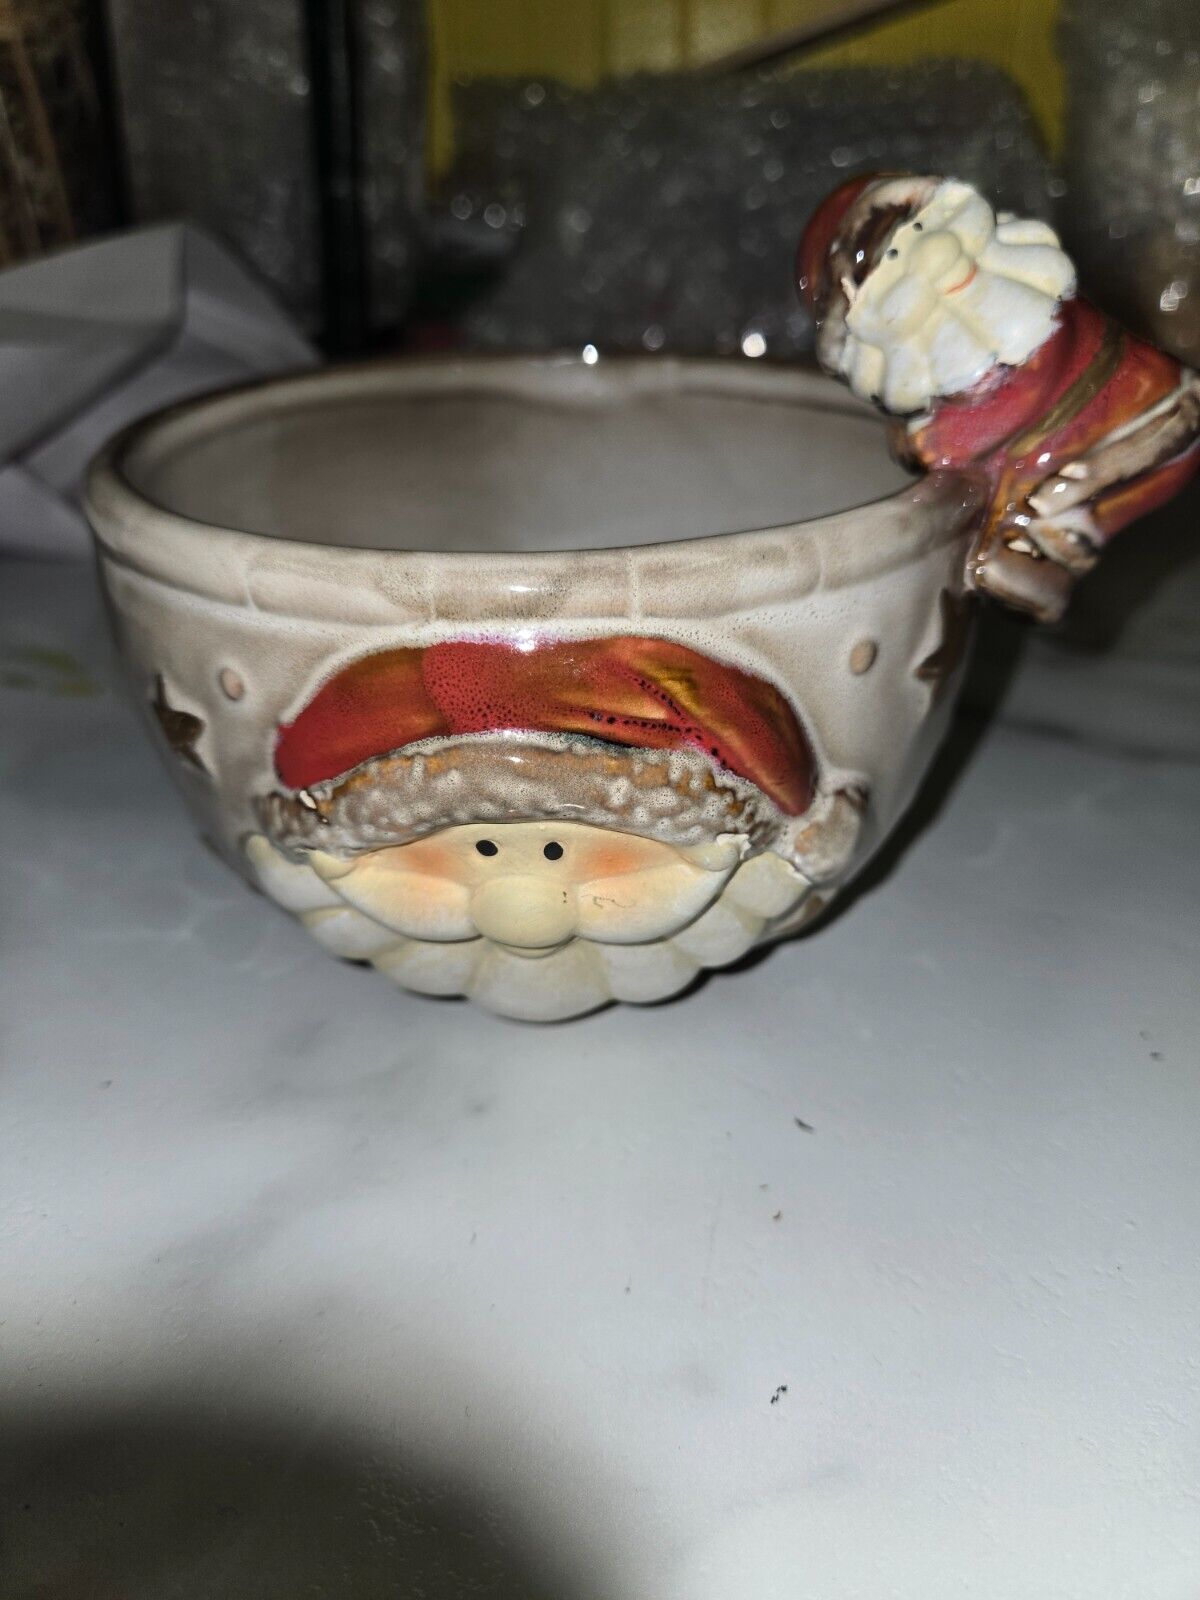 Preowned vintage santa bowl/planter with santa attached - really cute - ceramic